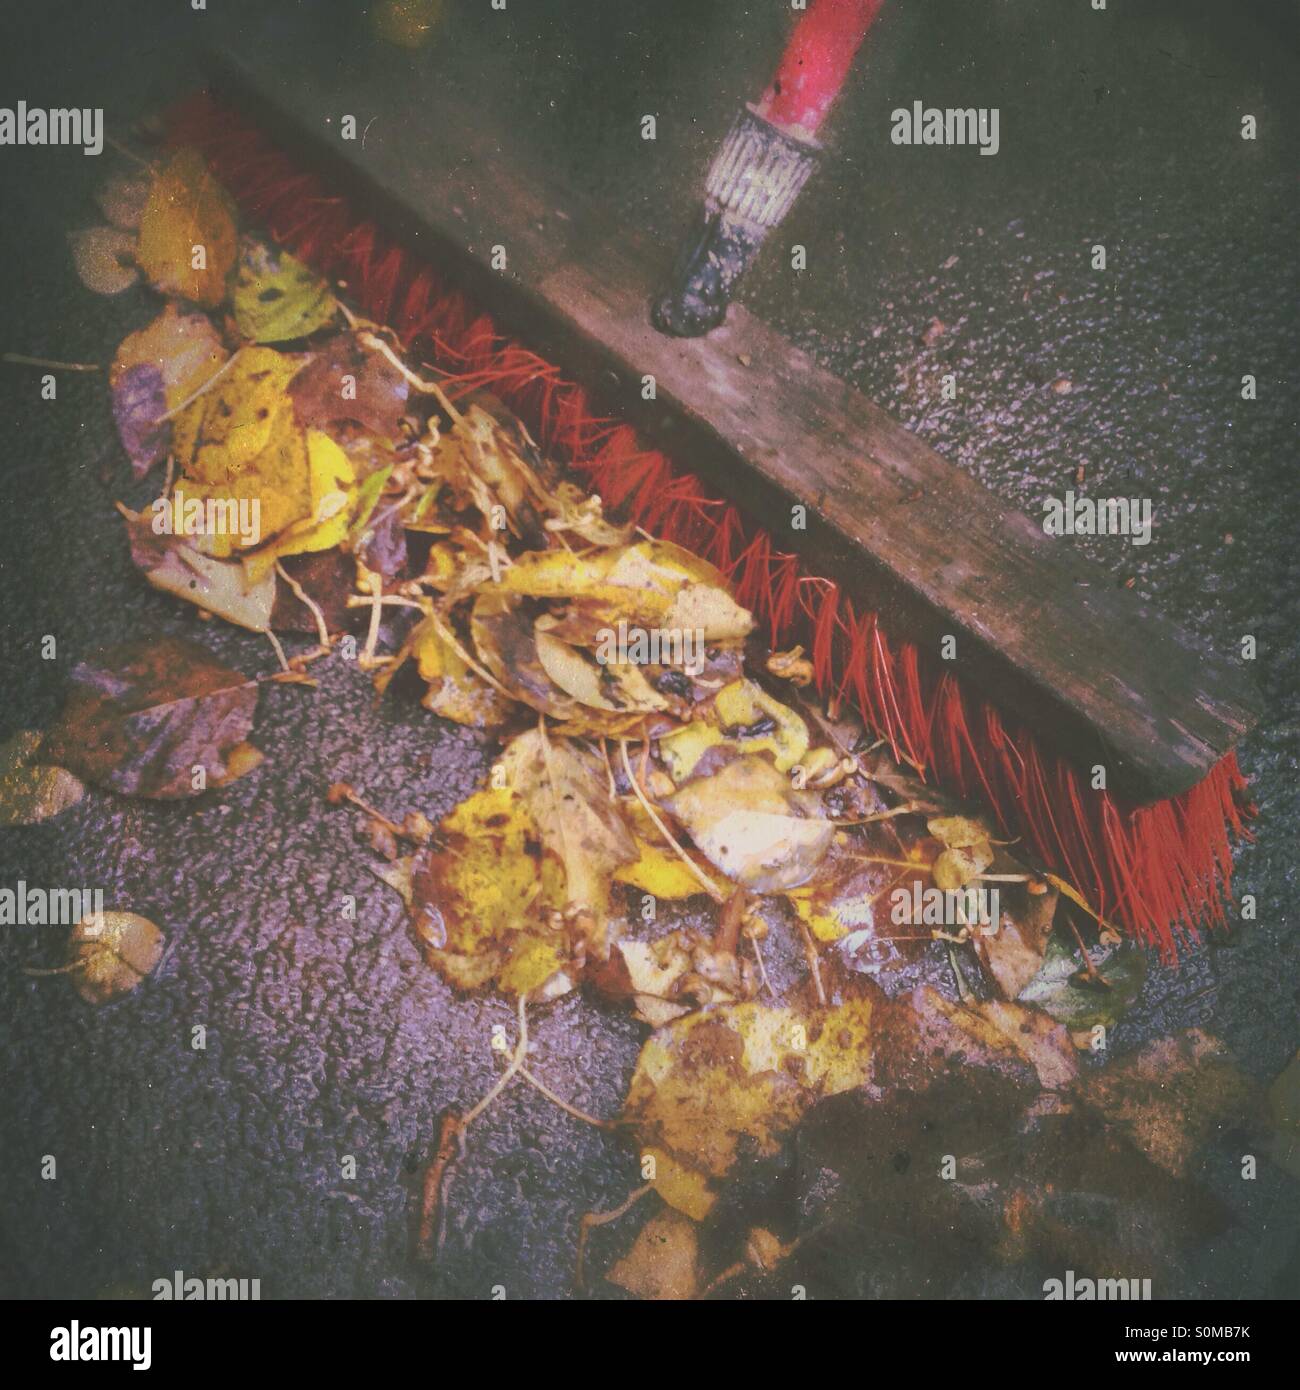 Sweeping fallen autumn leaves on a wet concrete floor Stock Photo